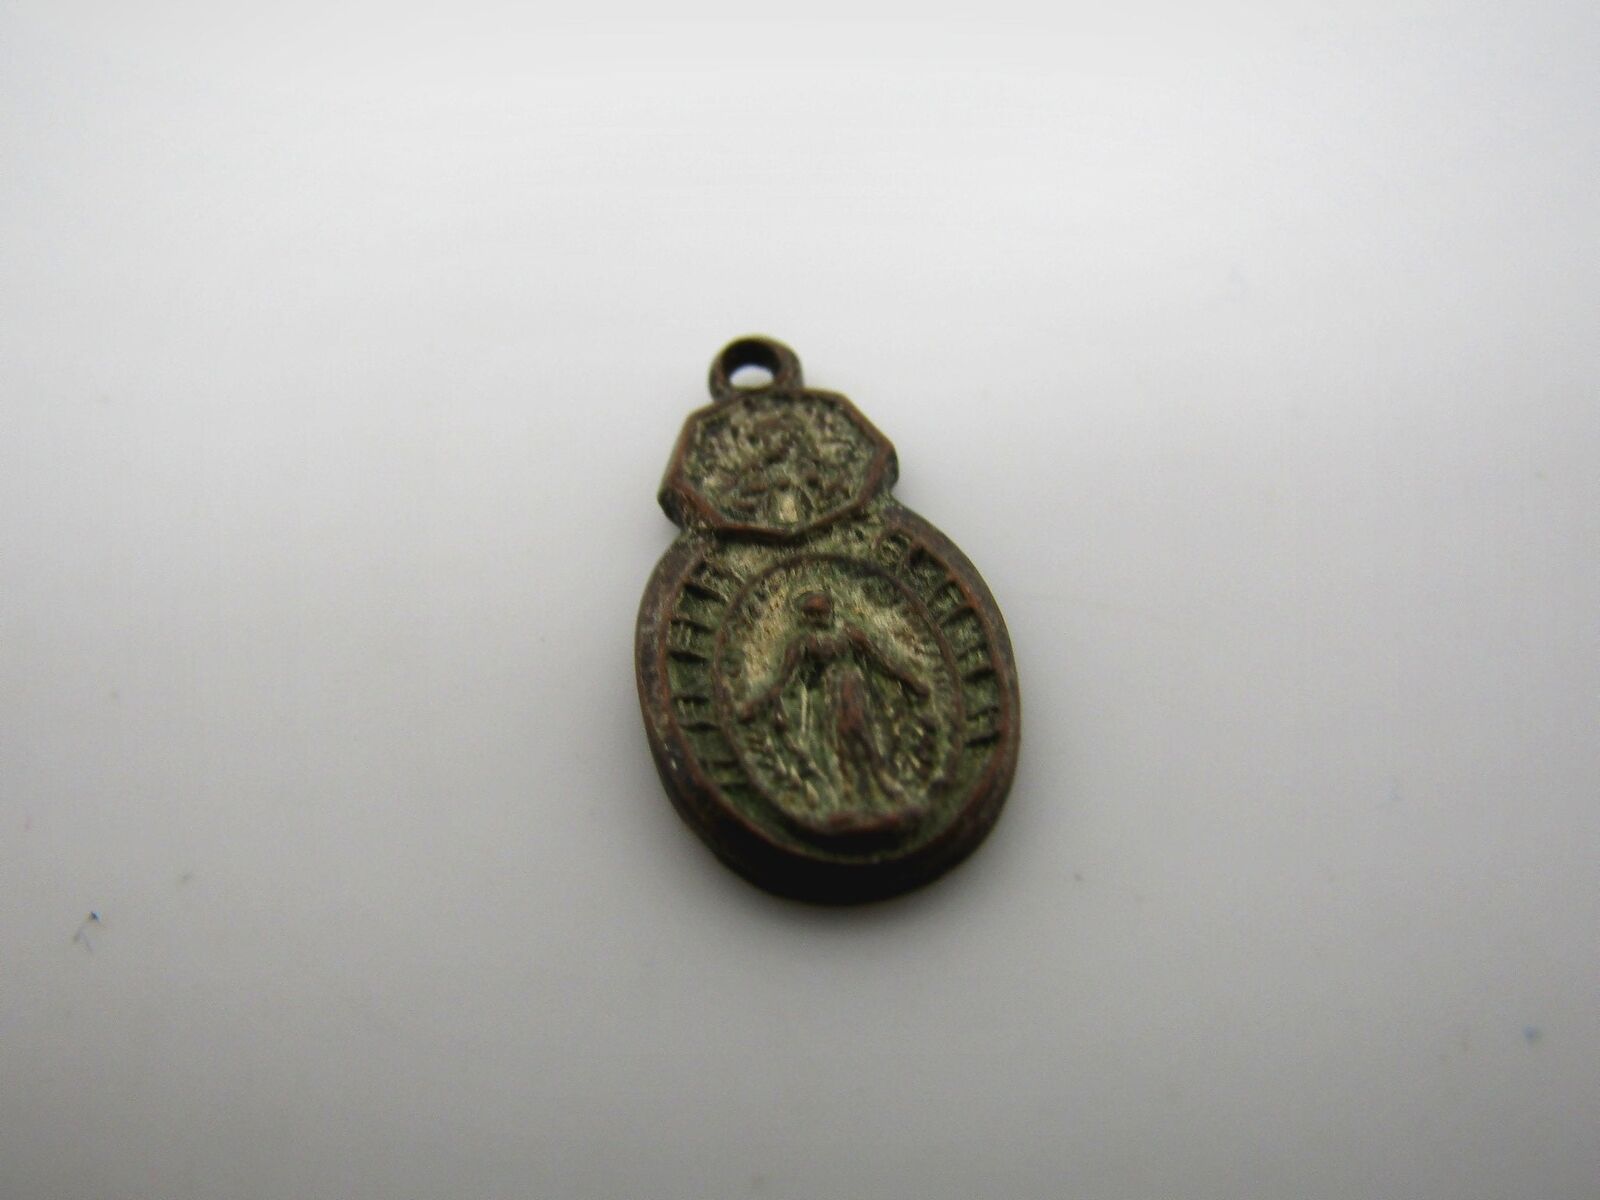 Vintage Christian Medal: Small Mary Old